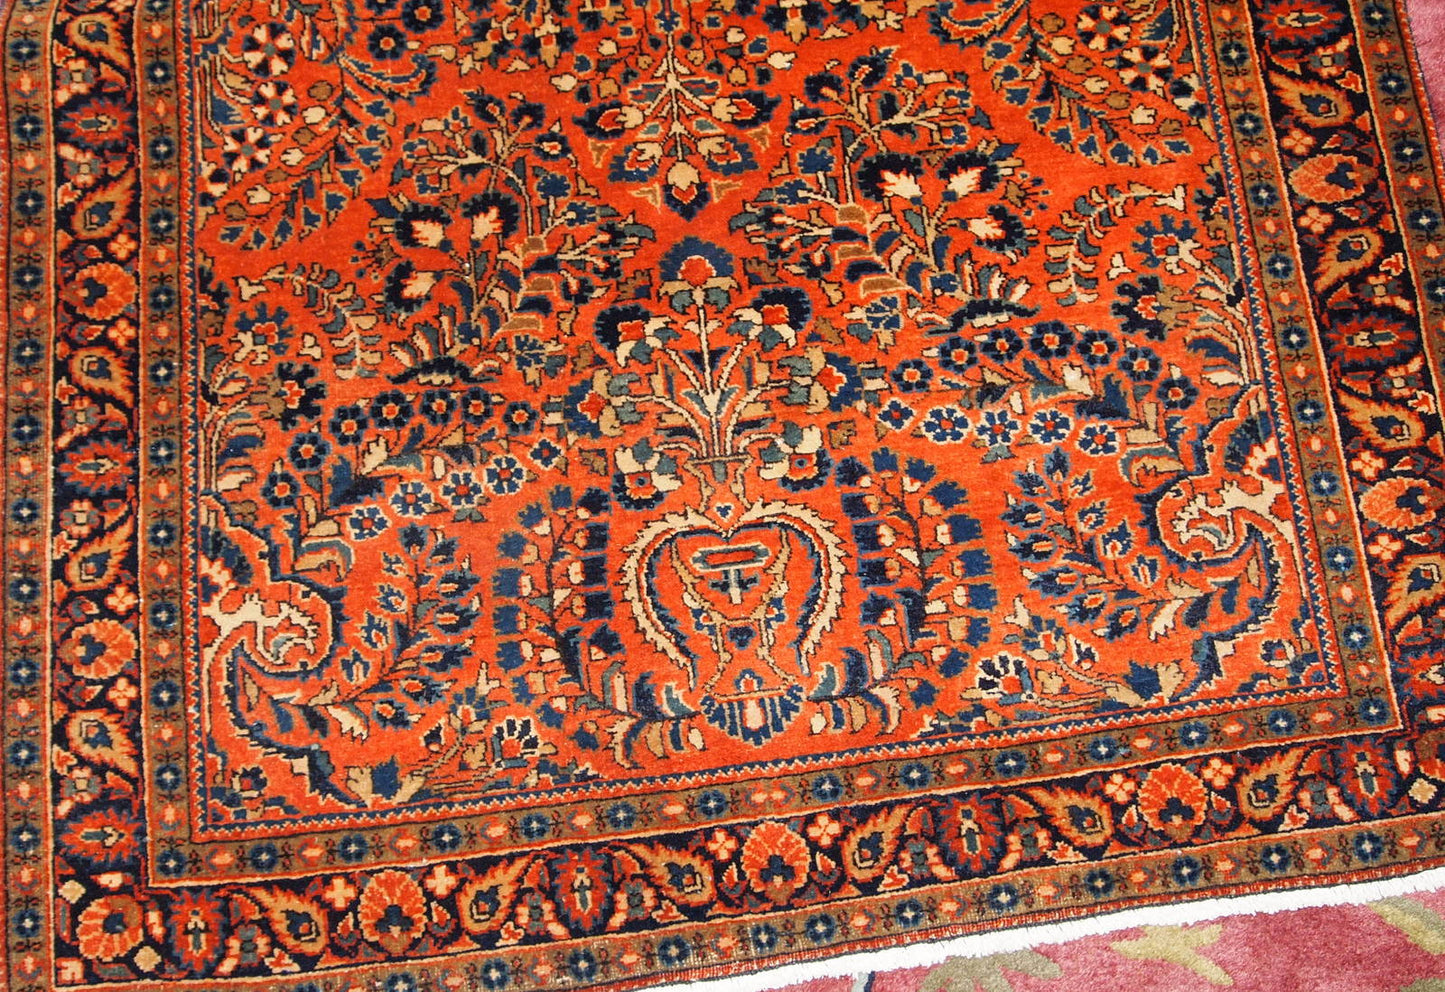 Hand made antique Persian Sarouk rug in red wool. The rug is in original good condition from the beginning of 20th century.